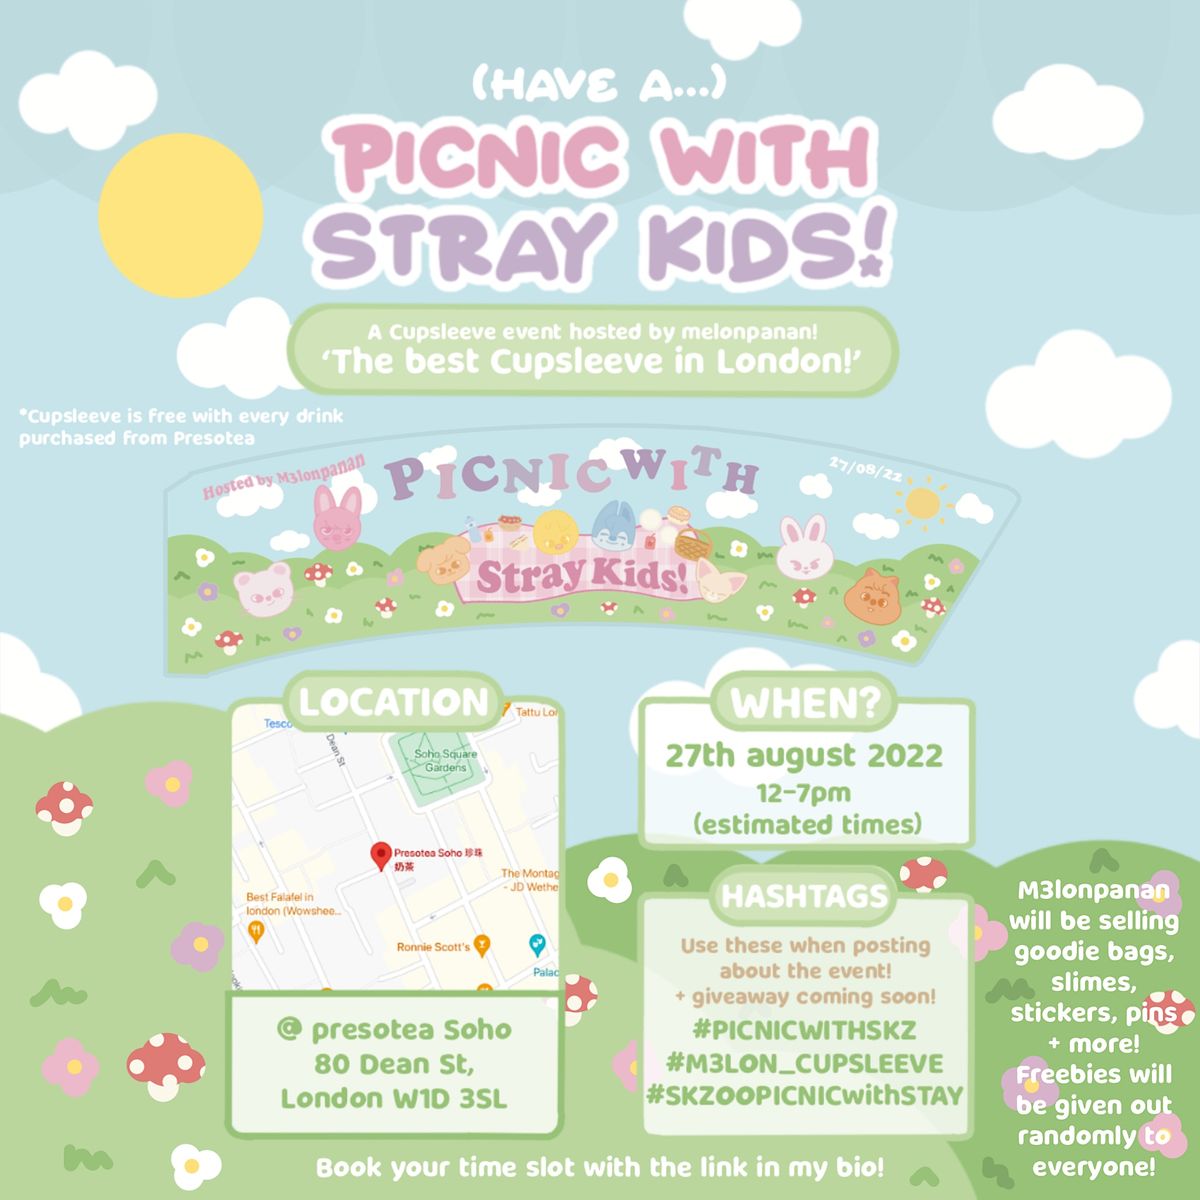 A Picnic with Stray Kids!